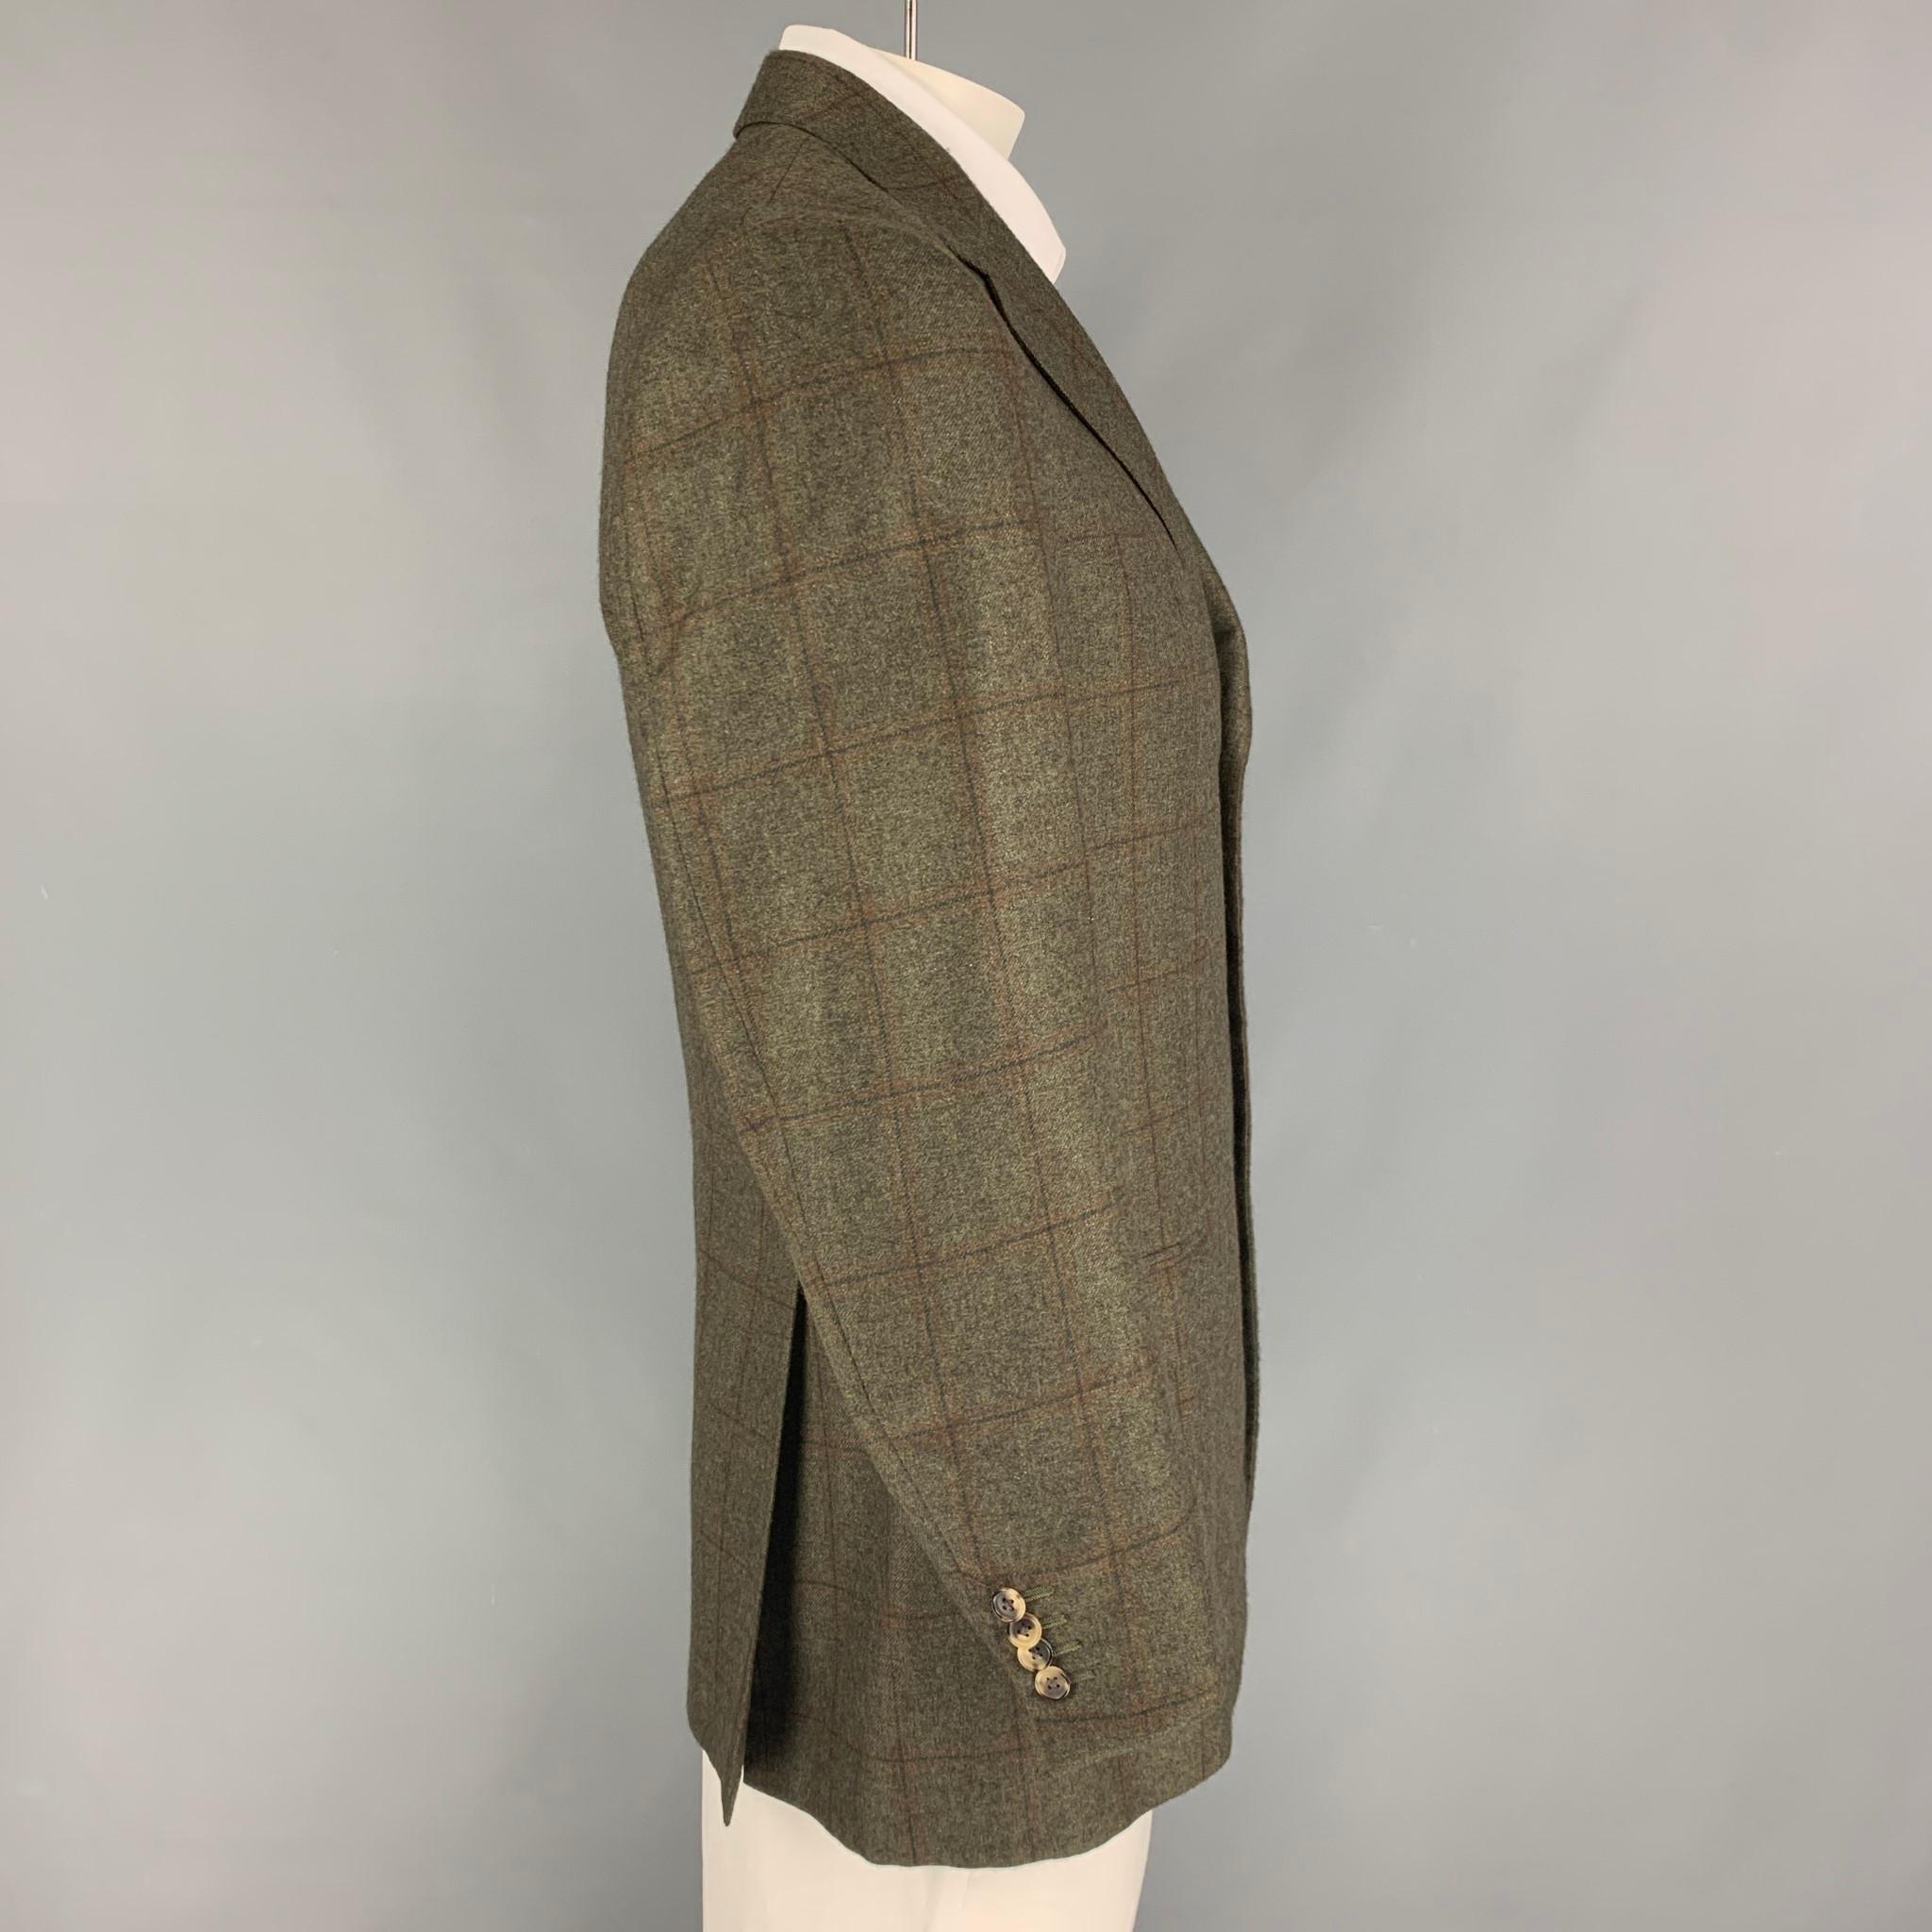 ERMENEGILDO ZEGNA sport coat comes in a olive & brown plaid cashmere with a full liner featuring a notch lapel, flap pockets, double back vent, and a three button closure. 

Very Good Pre-Owned Condition.
Marked: 52

Measurements:

Shoulder: 18